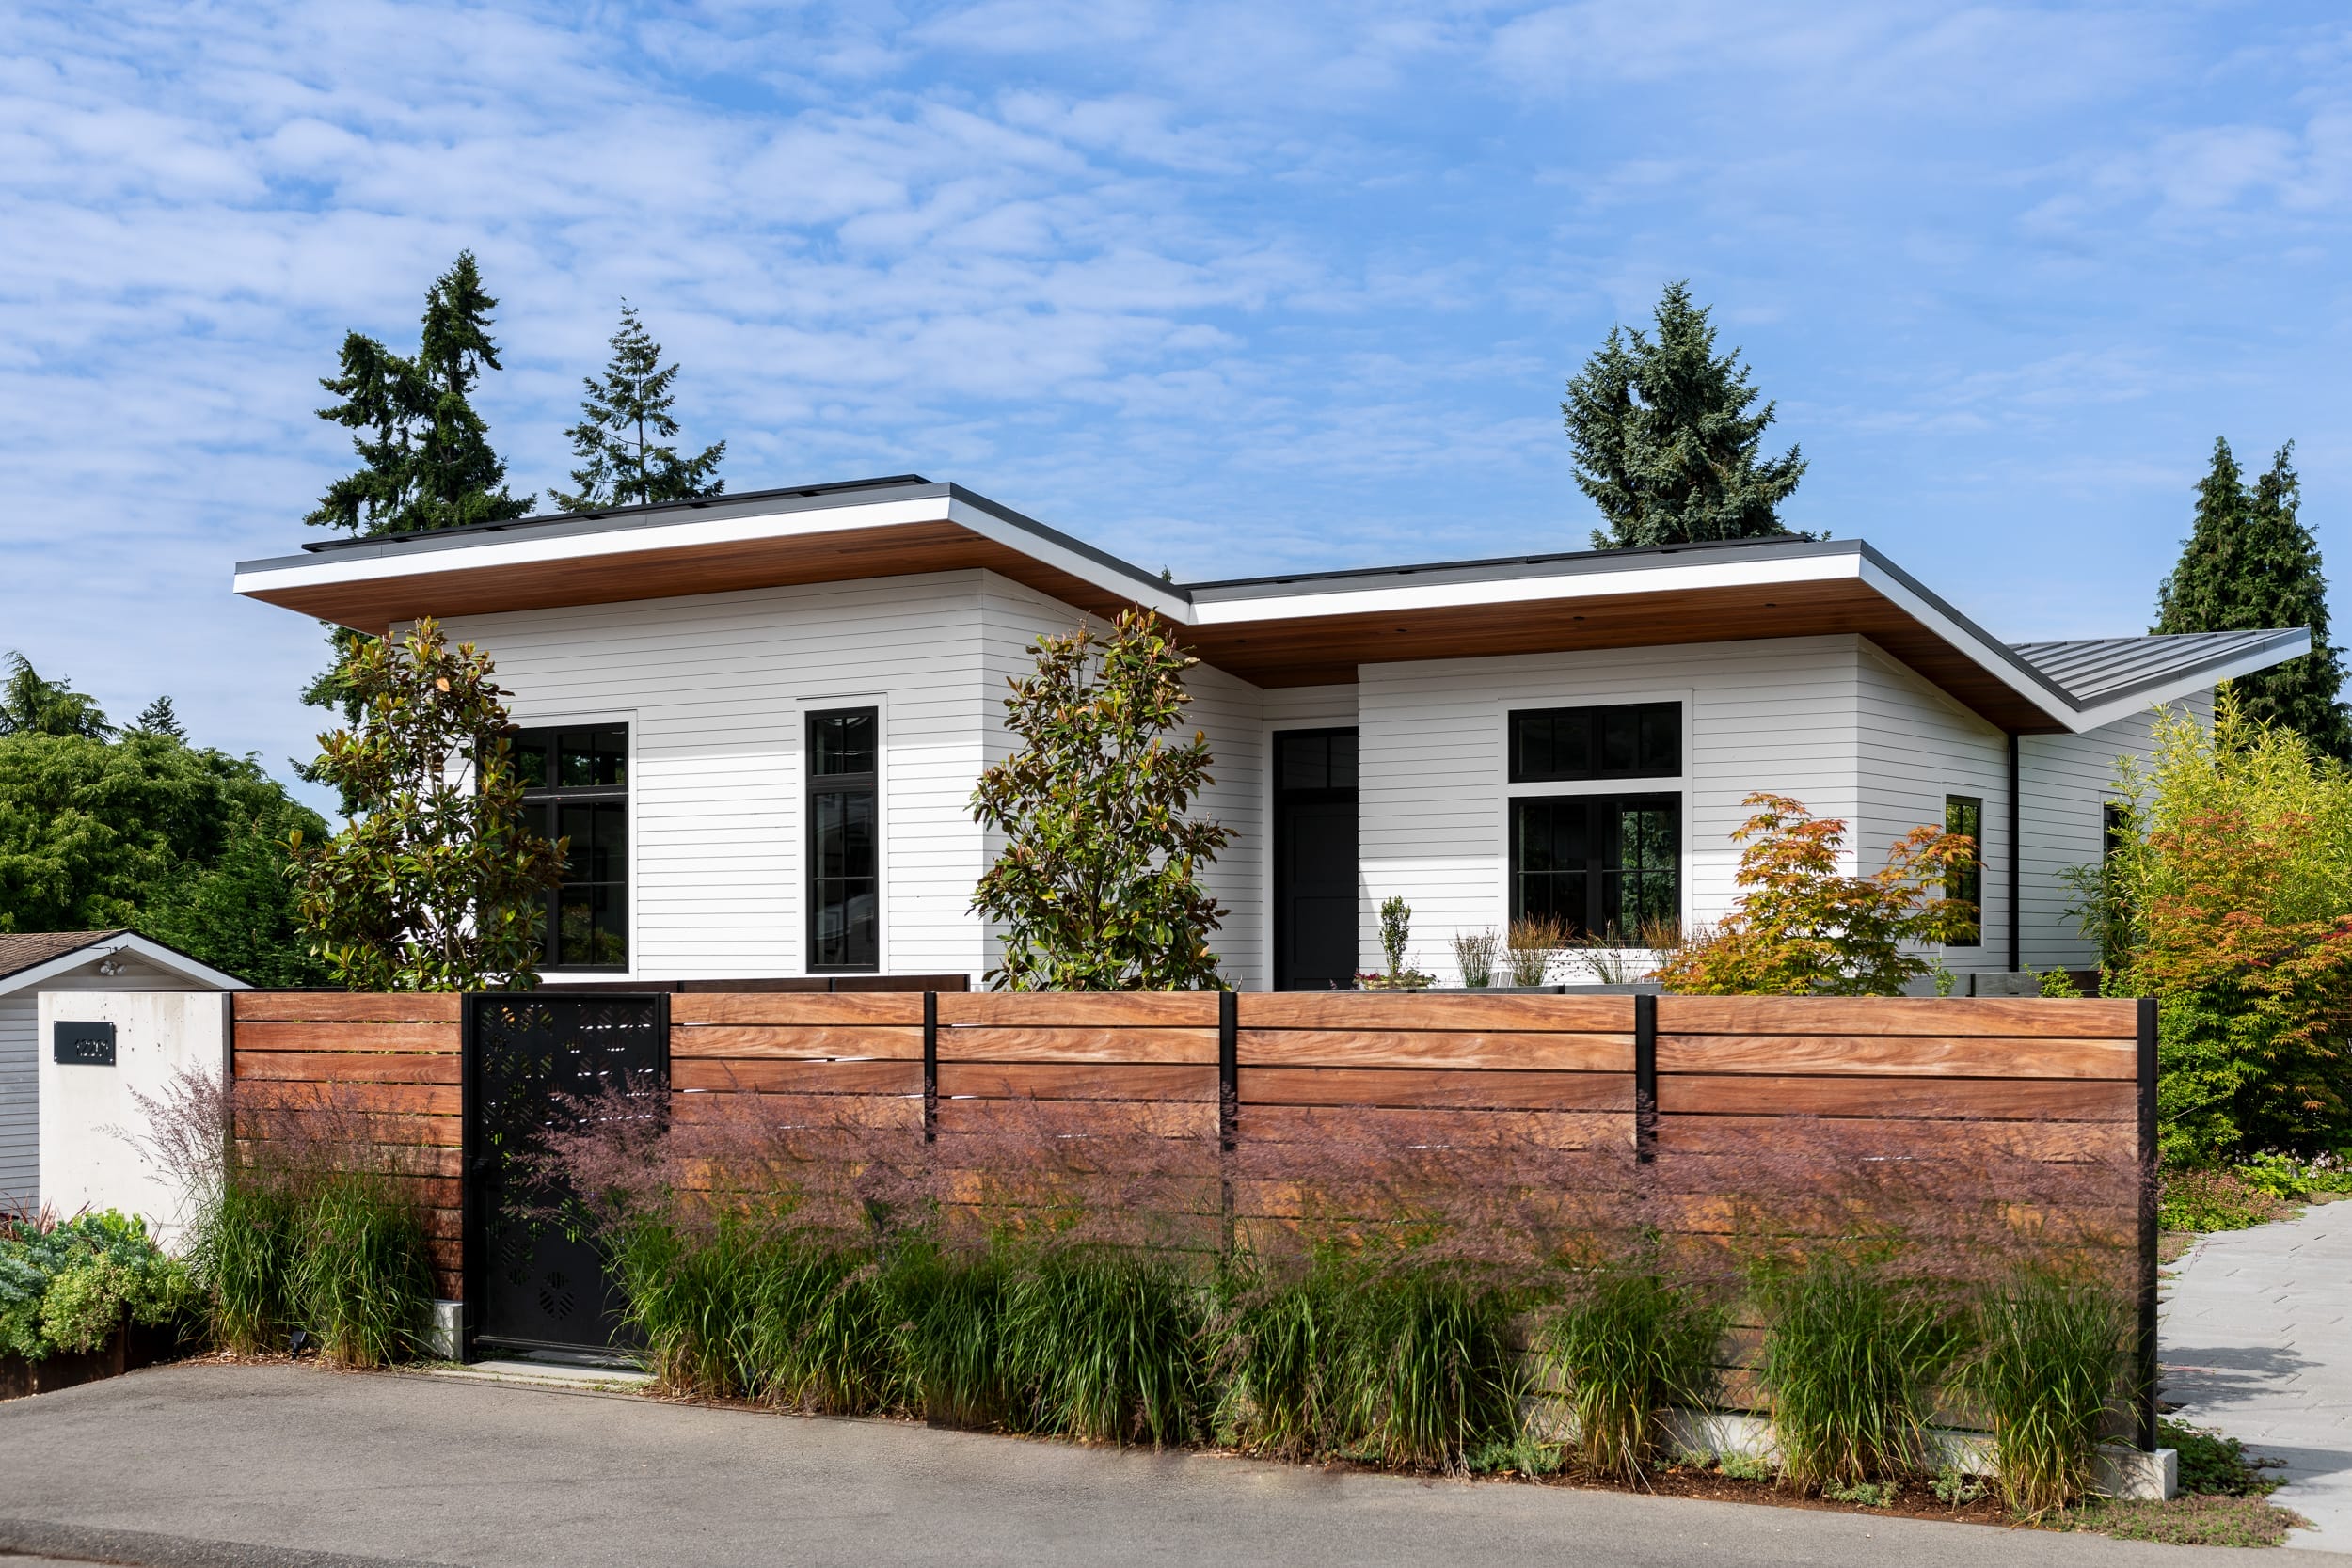 A modern home with a wooden fence and bushes.